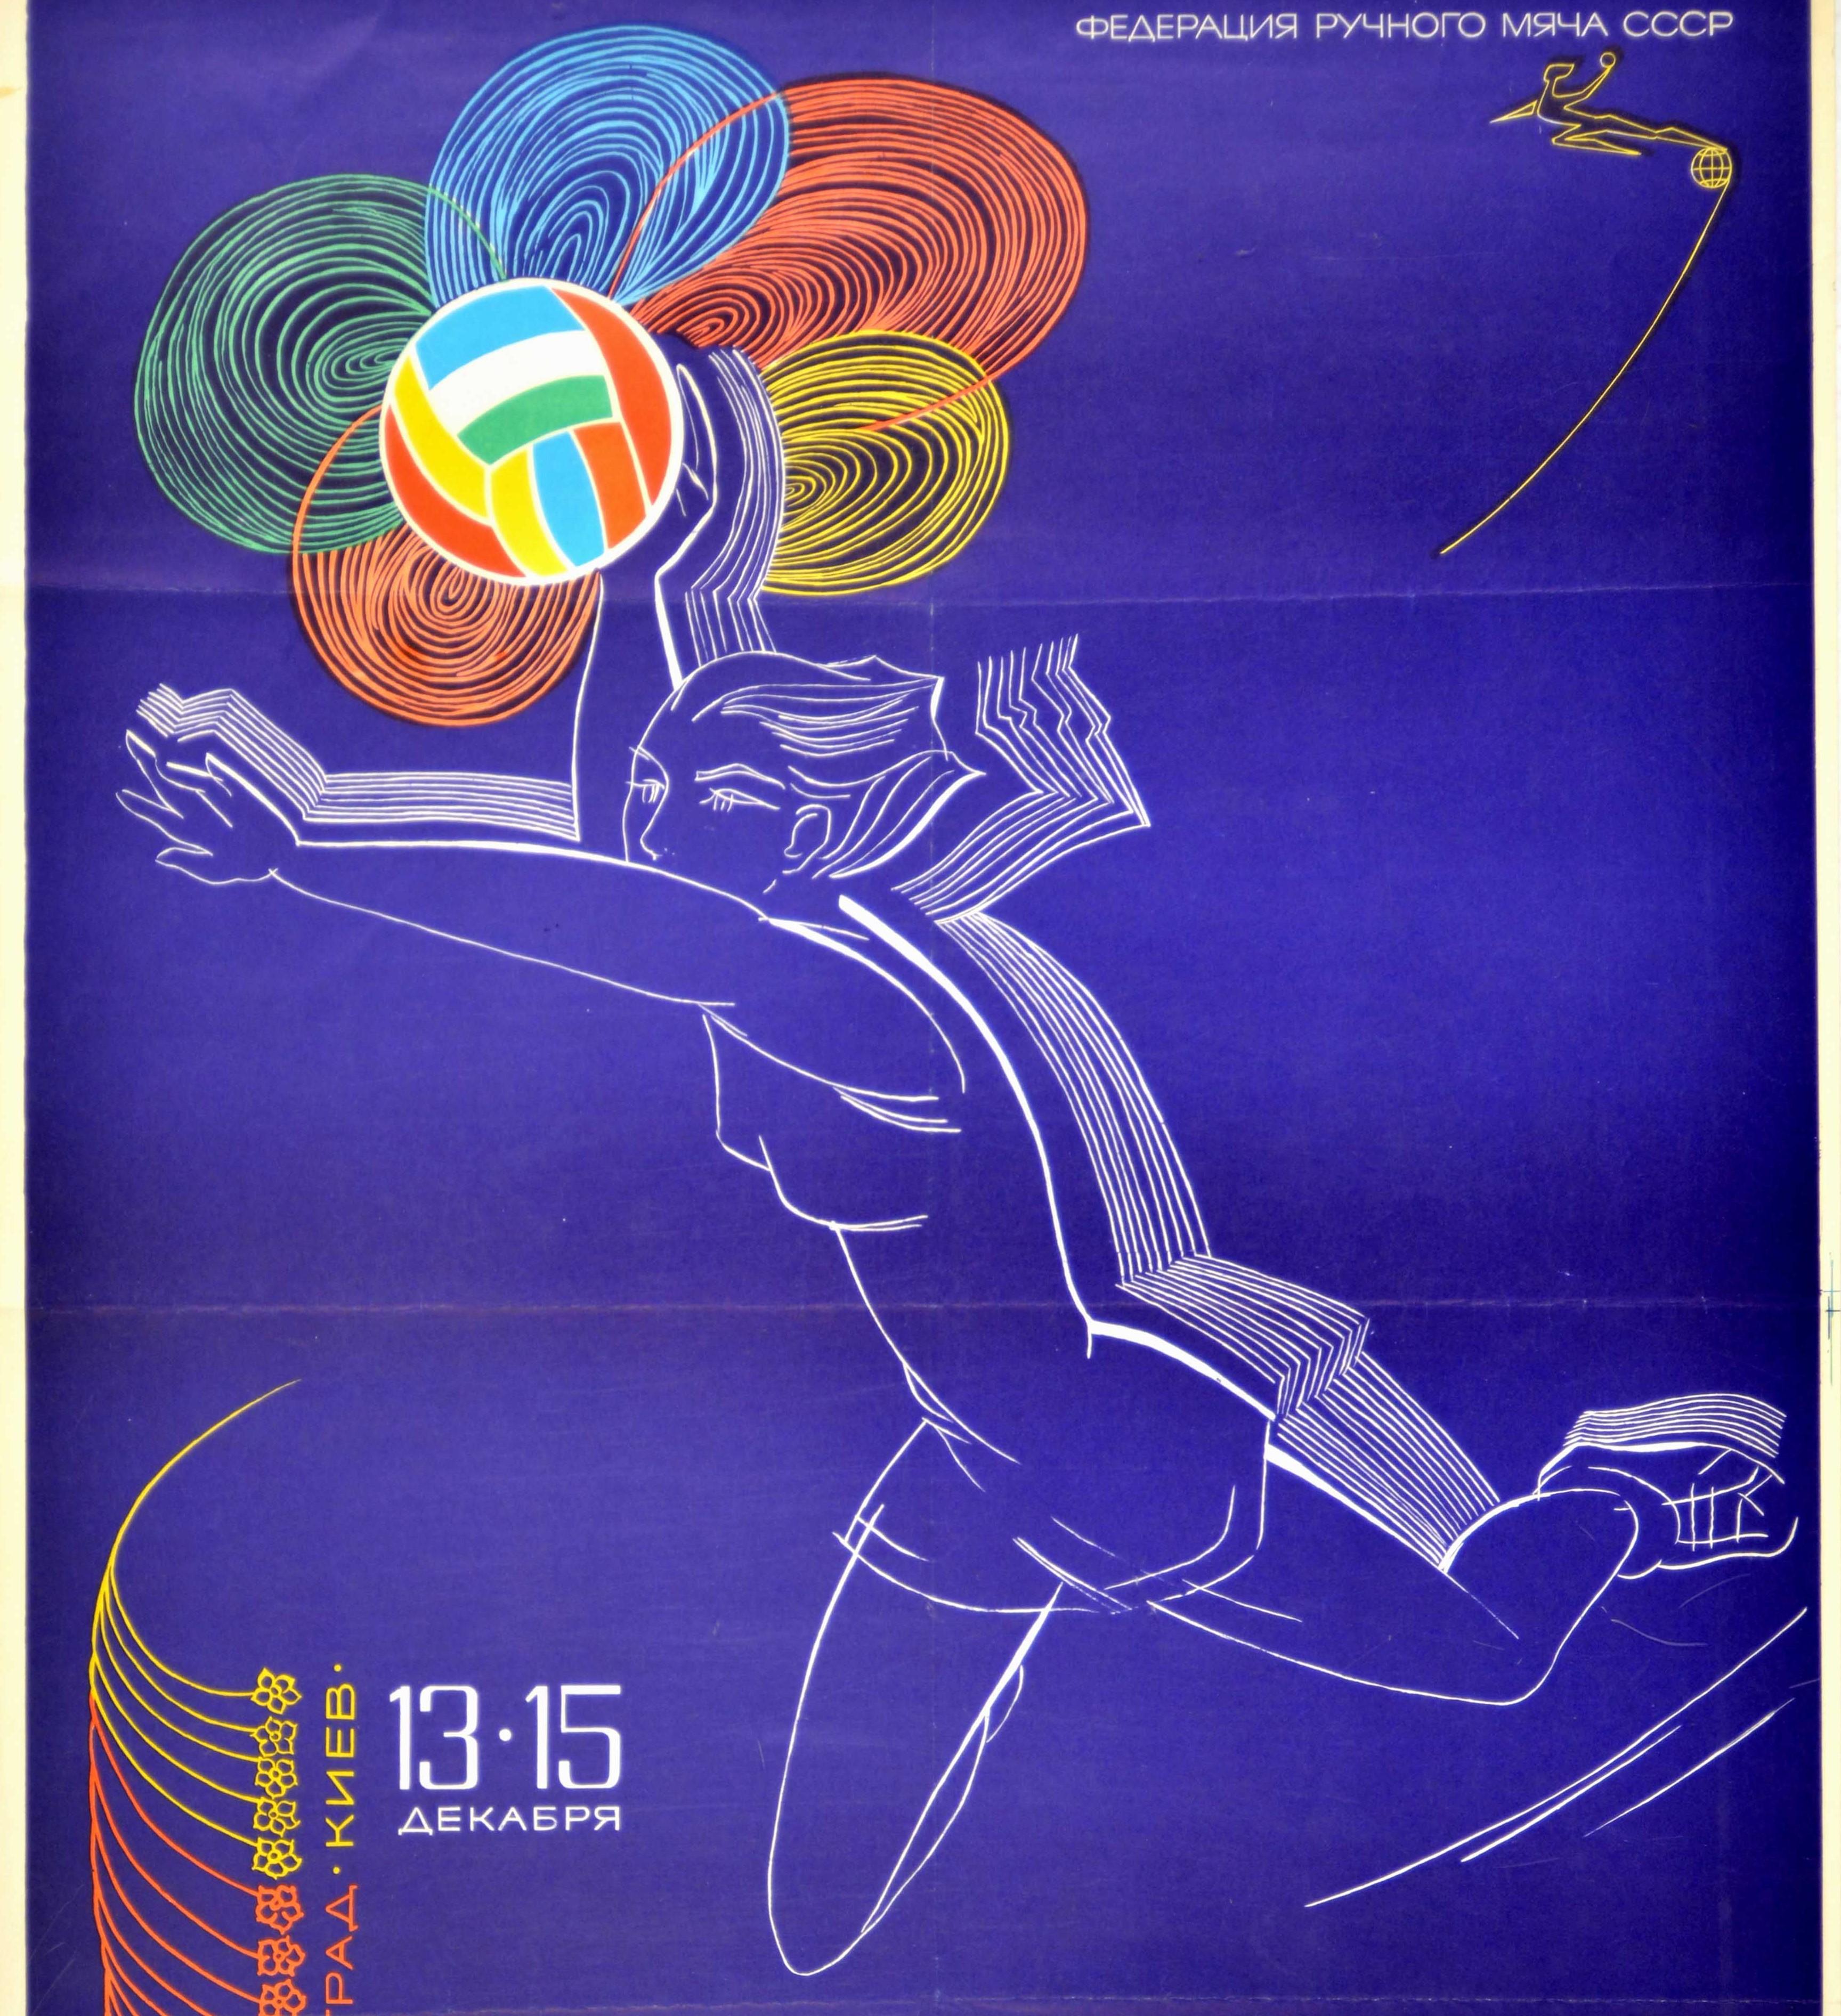 Original vintage sport poster for the Women's World Handball Championship 1968 / ?????????? ???? ?? ??????? ???? held in the Soviet cities of Kiev, Leningrad and Moscow featuring a dynamic white line design by Eduard Nikolayev Drobnitsky